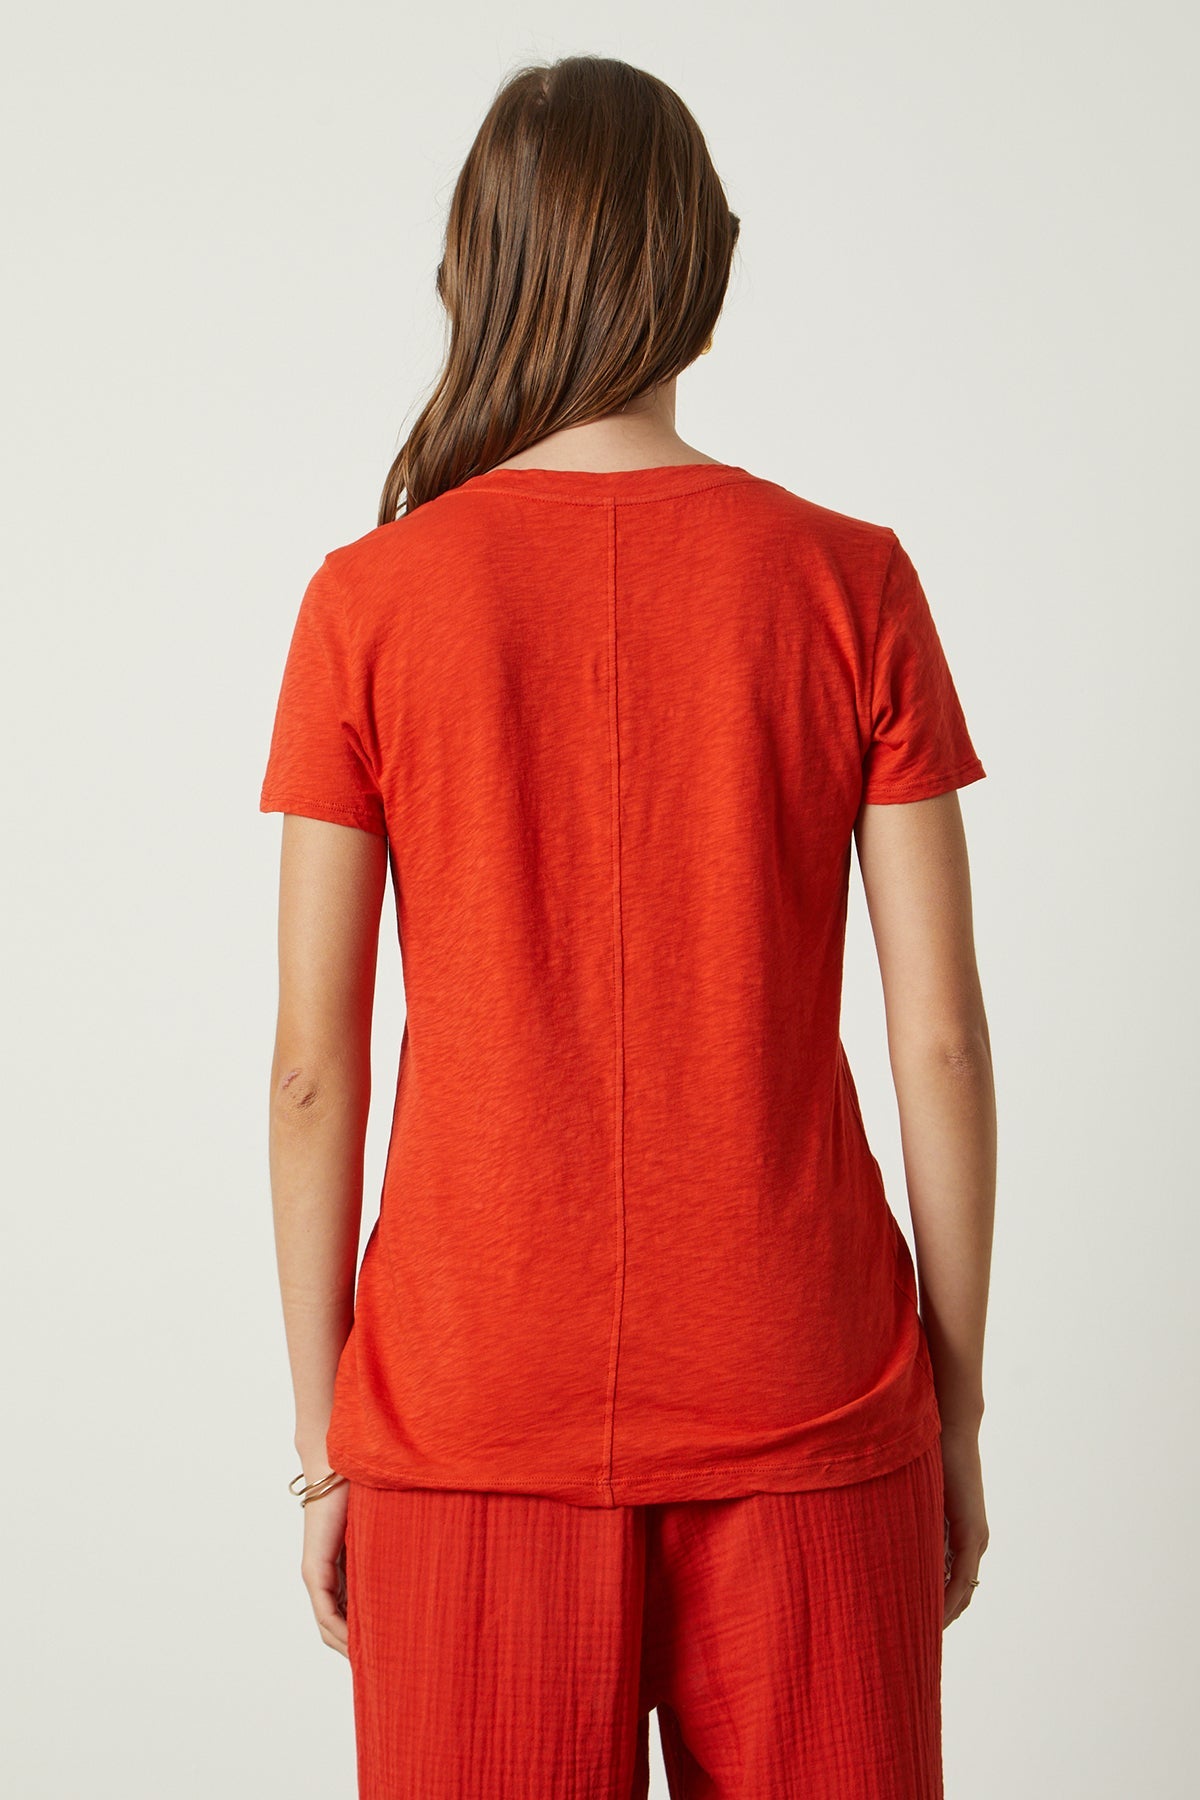 The sentence: "the back view of a woman wearing a Velvet by Graham & Spencer LILITH COTTON SLUB V-NECK TEE.-26630611304641